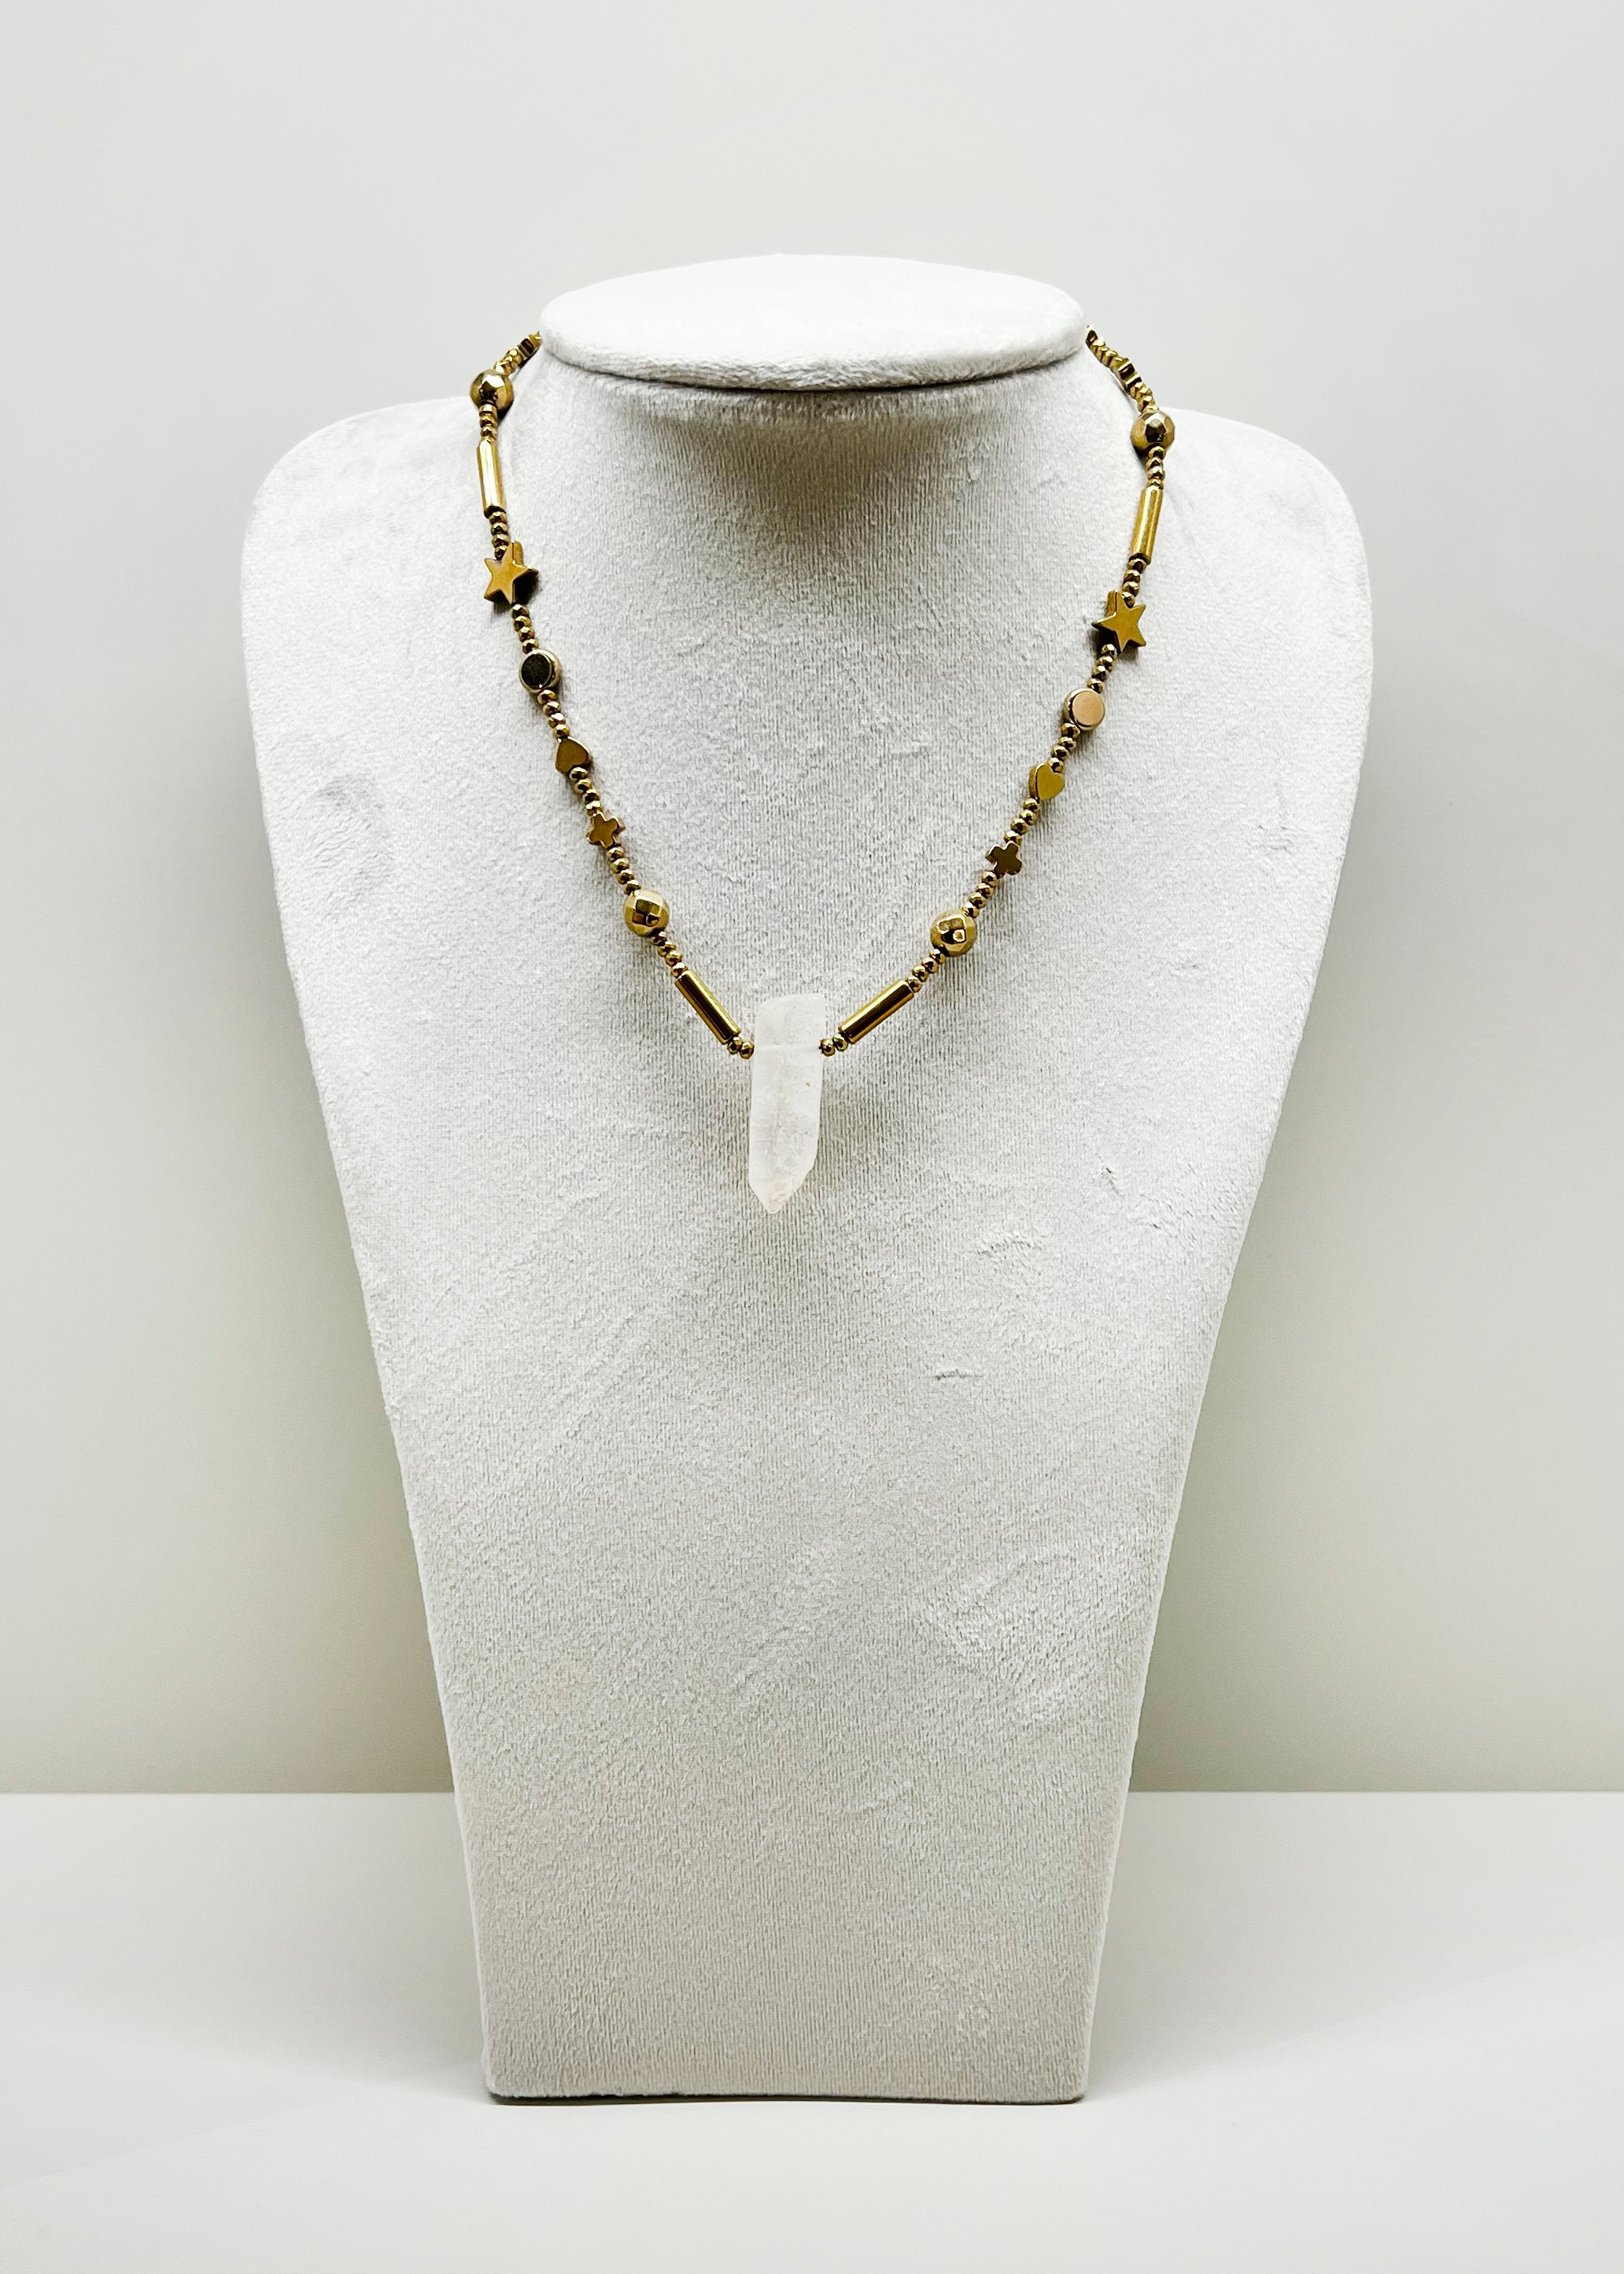 JustBrazil-Necklace-Fornax Crystal Ematite Necklace-Just Brazil